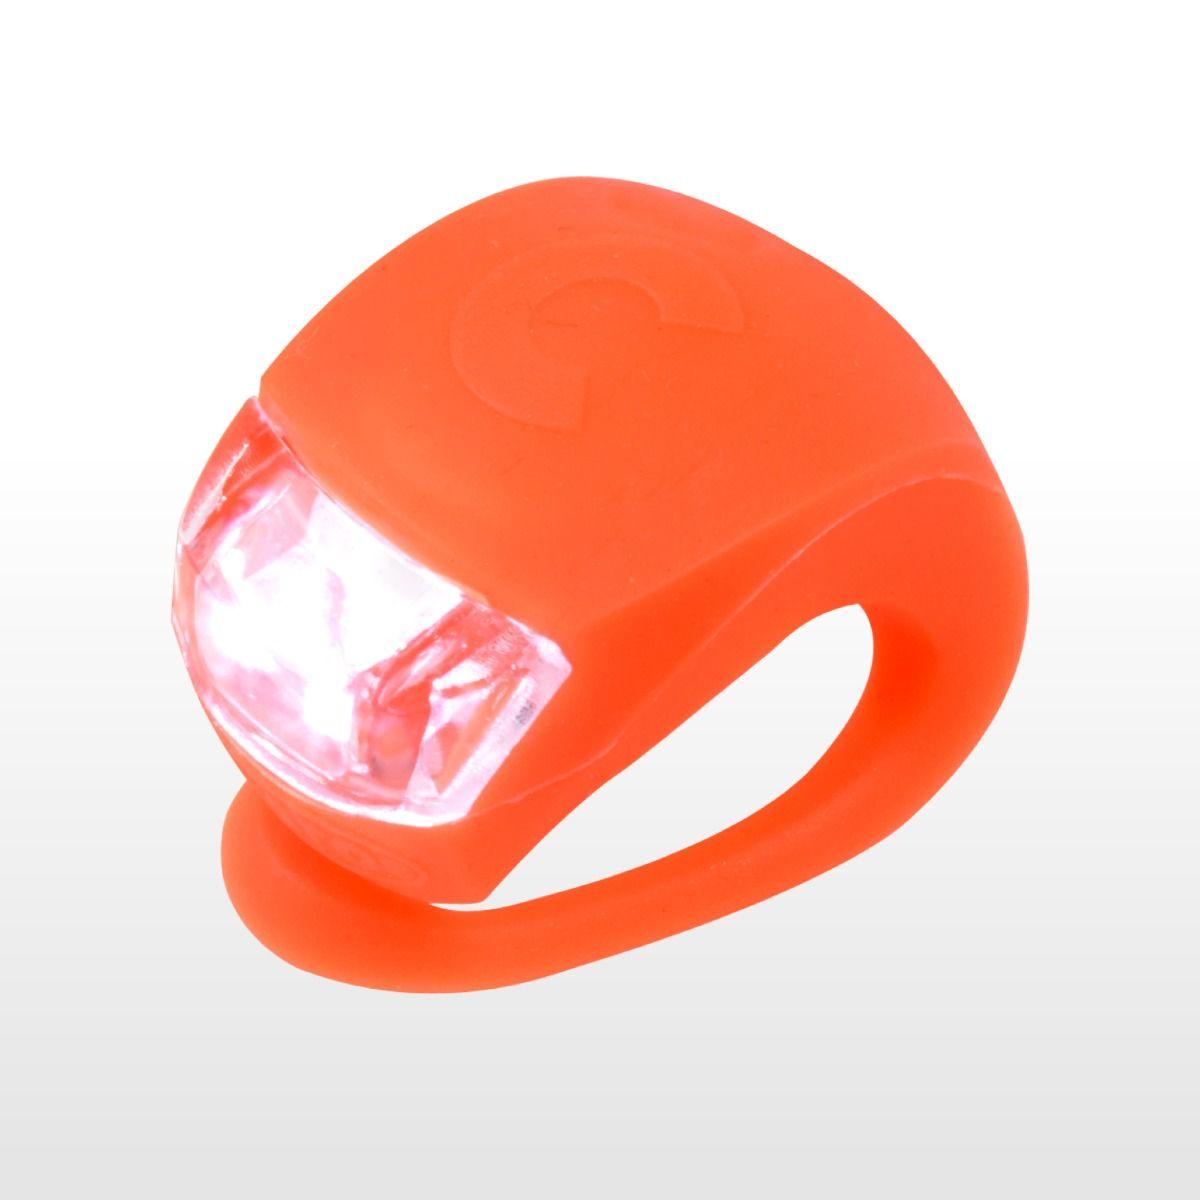 Red and Orange Ball Logo - Micro Light. £ 8.95. Micro Scooters.co.uk